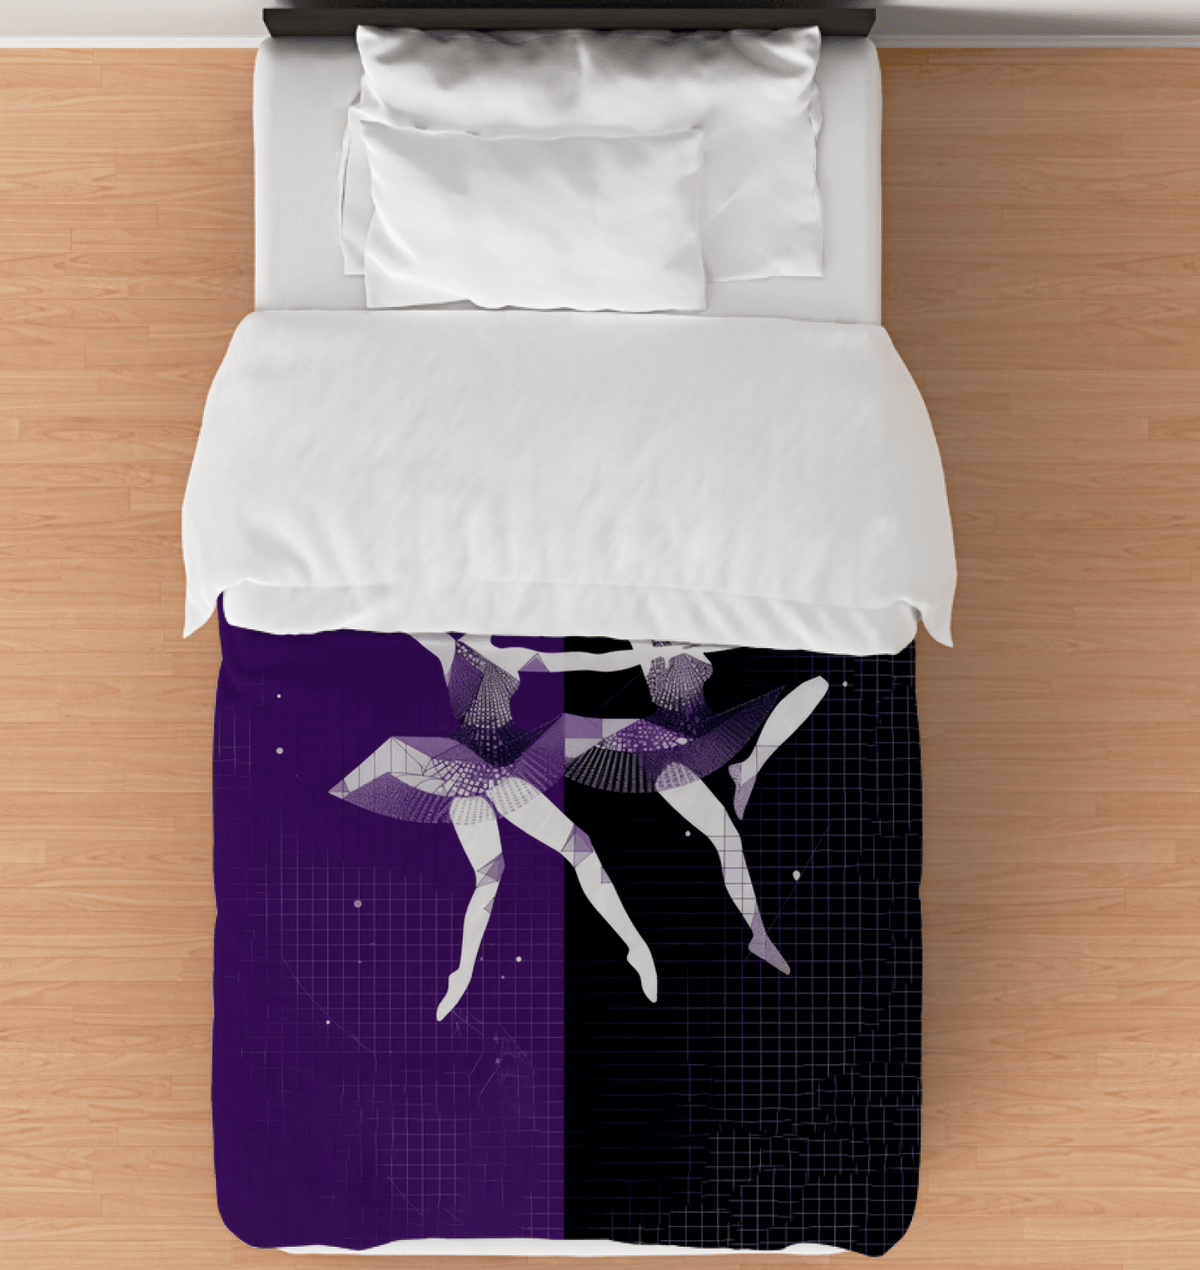 Twin-Size Comforter with Women in Motion Design - Cozy and Artistic Bedding